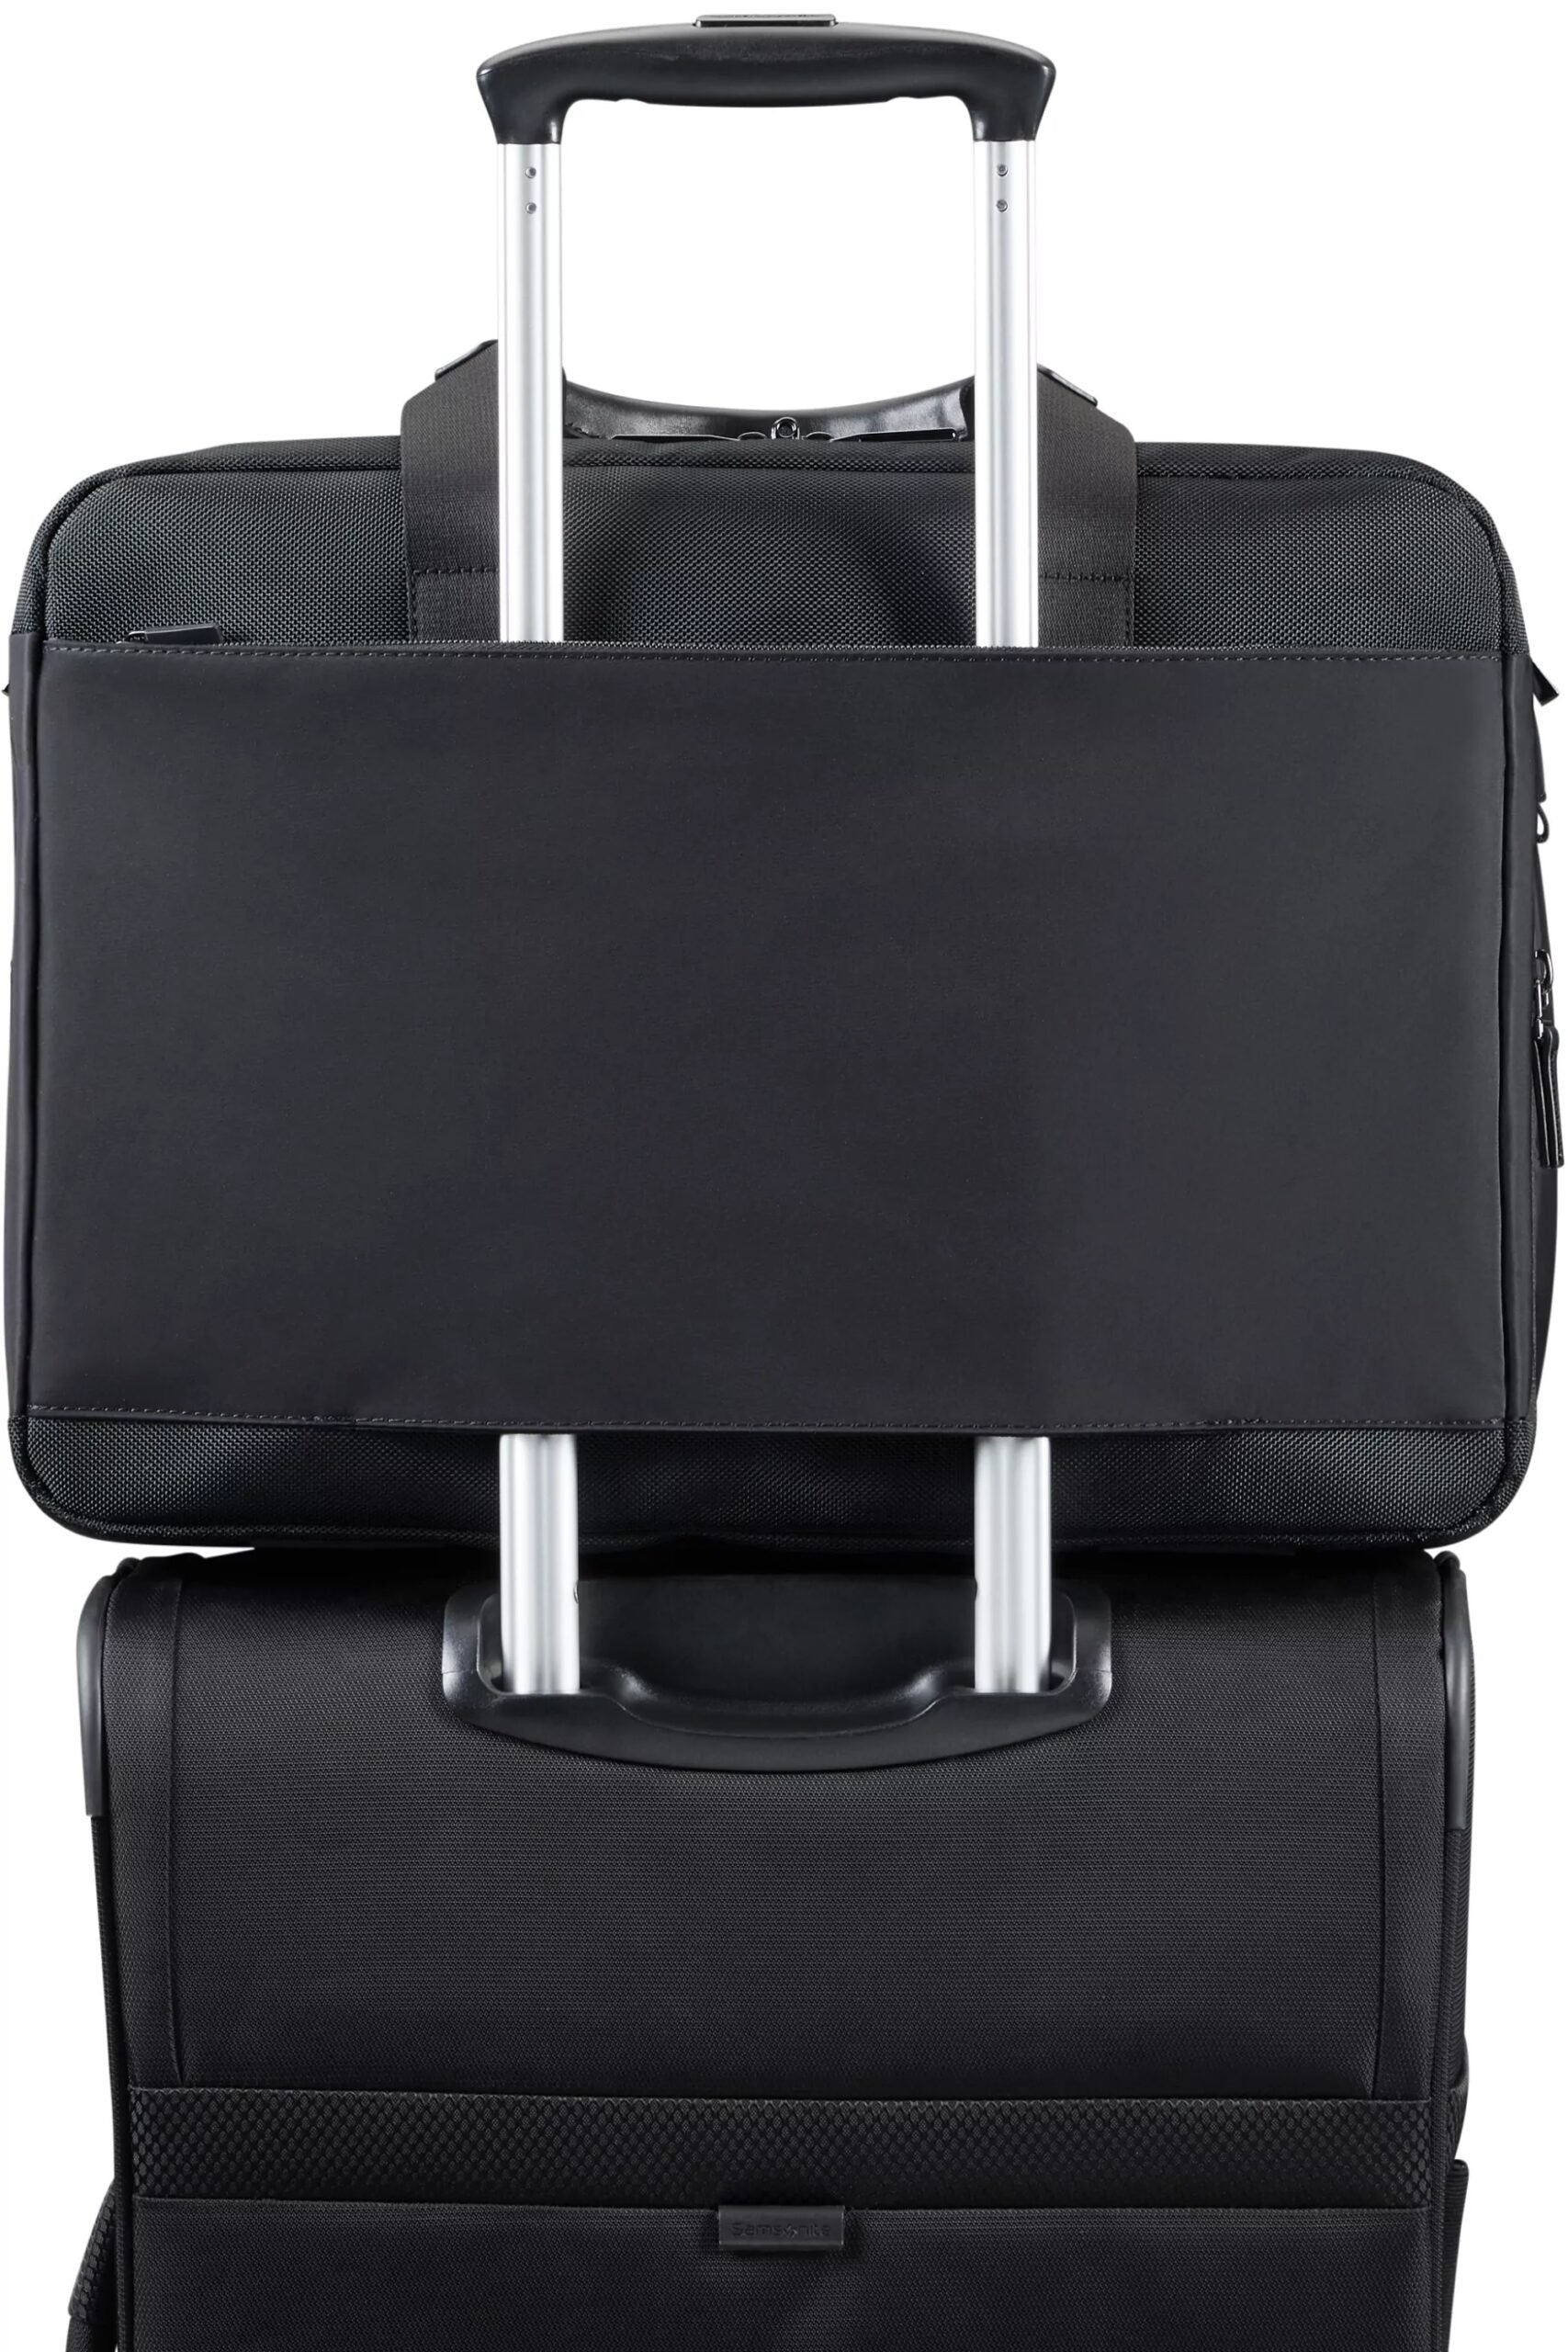 Openroad briefcase 14.6 5